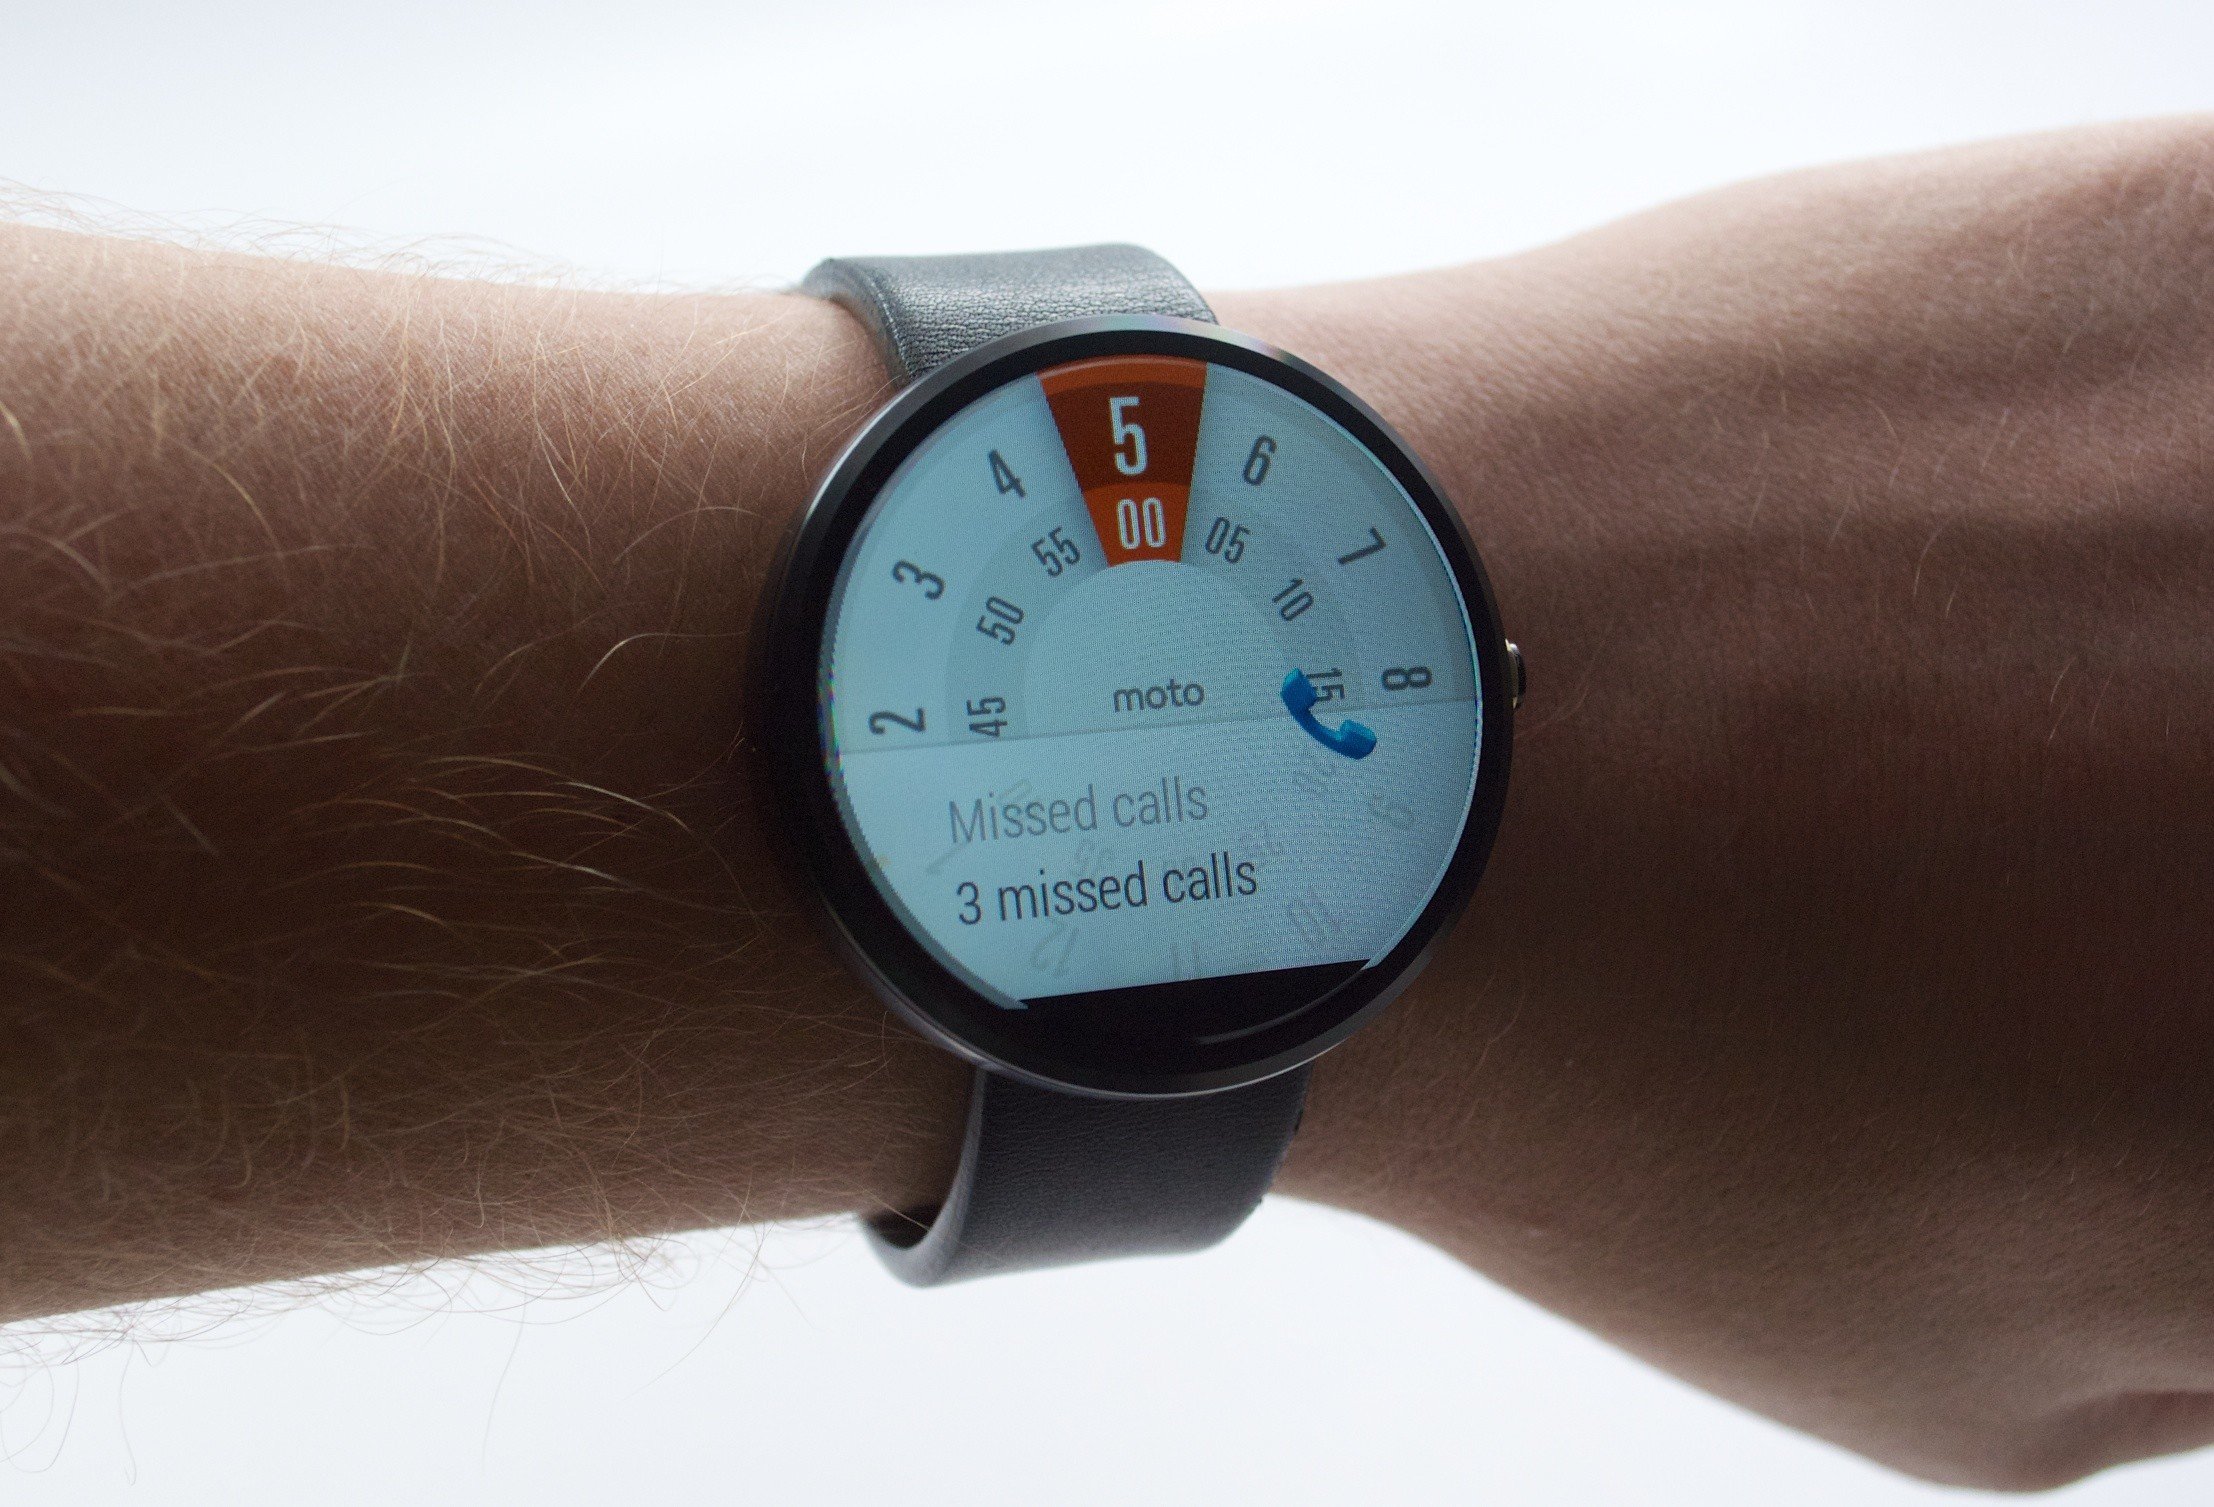 The Moto 360 shows any notification that is on your Android phone.